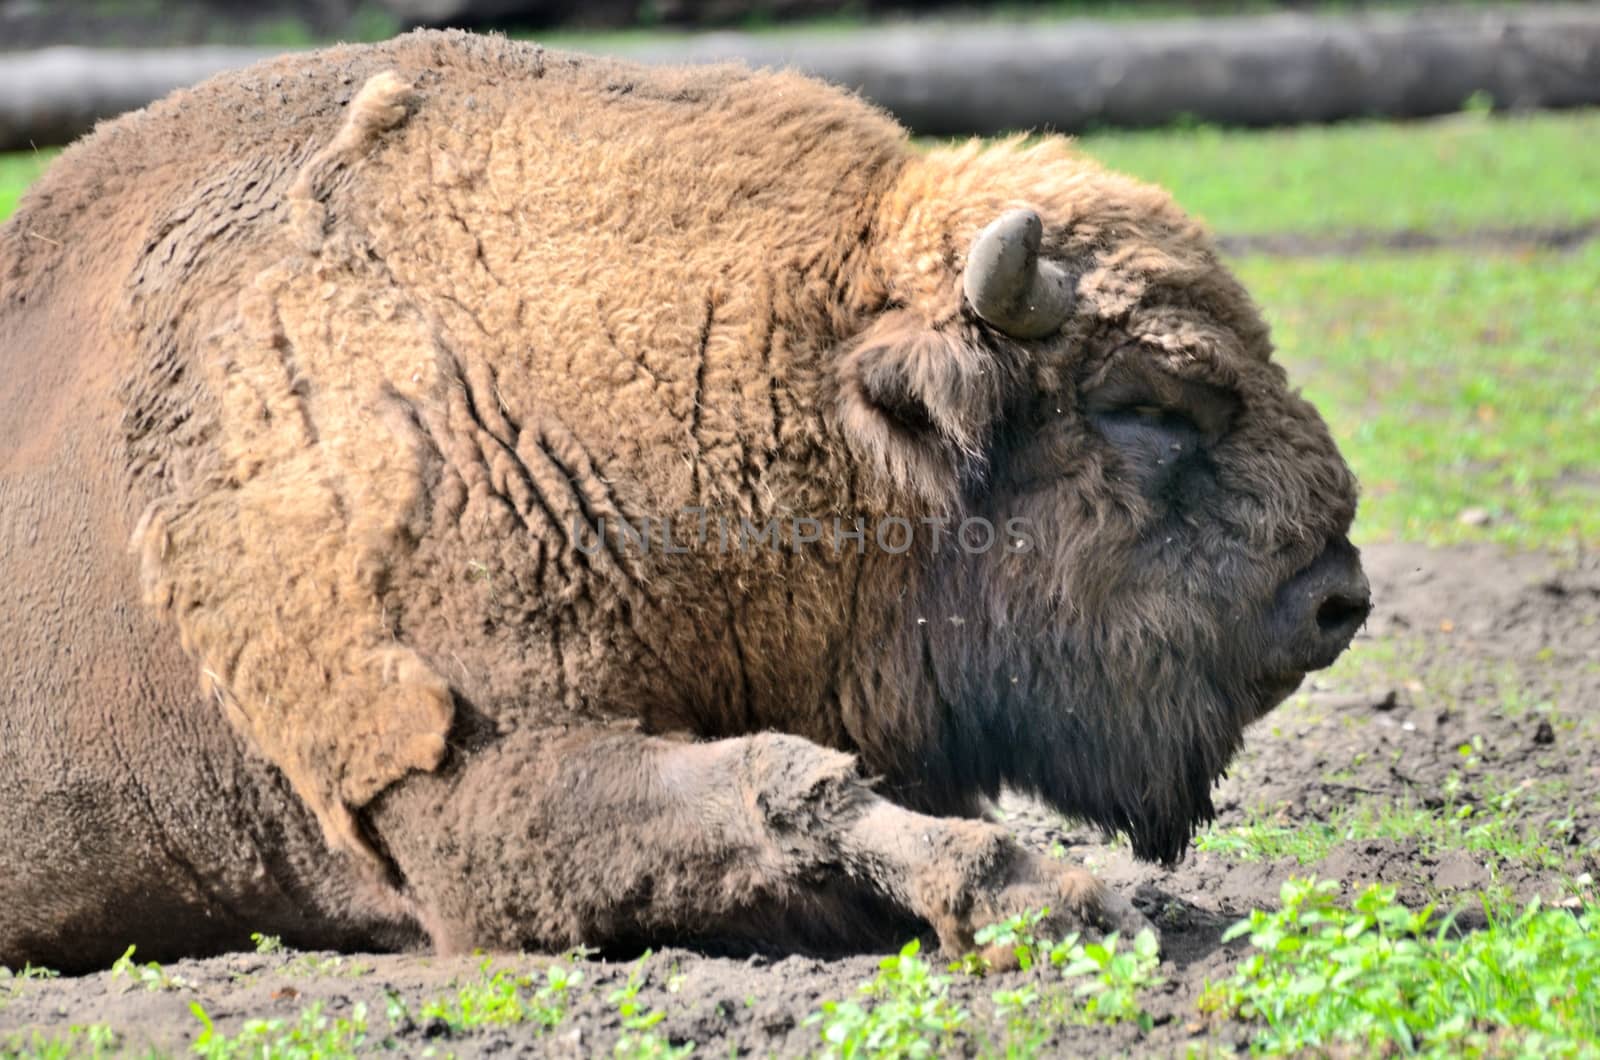 Traditional Polish bison in Wroclaw's ZOO, Poland. Animal changes fur during summer.